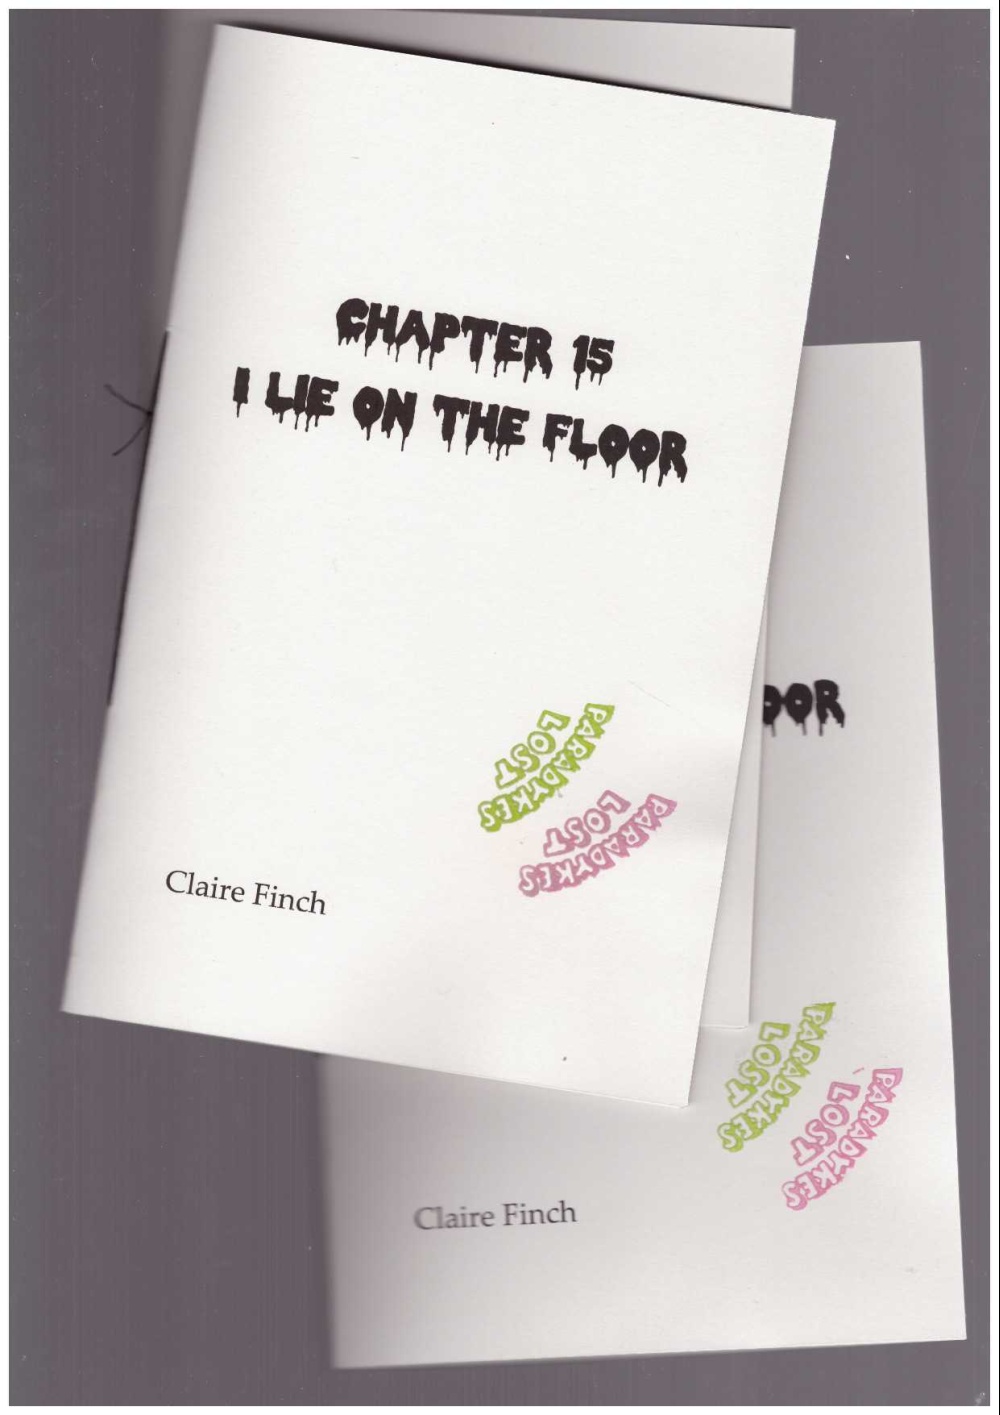 Chapter 15: I lie on the floor